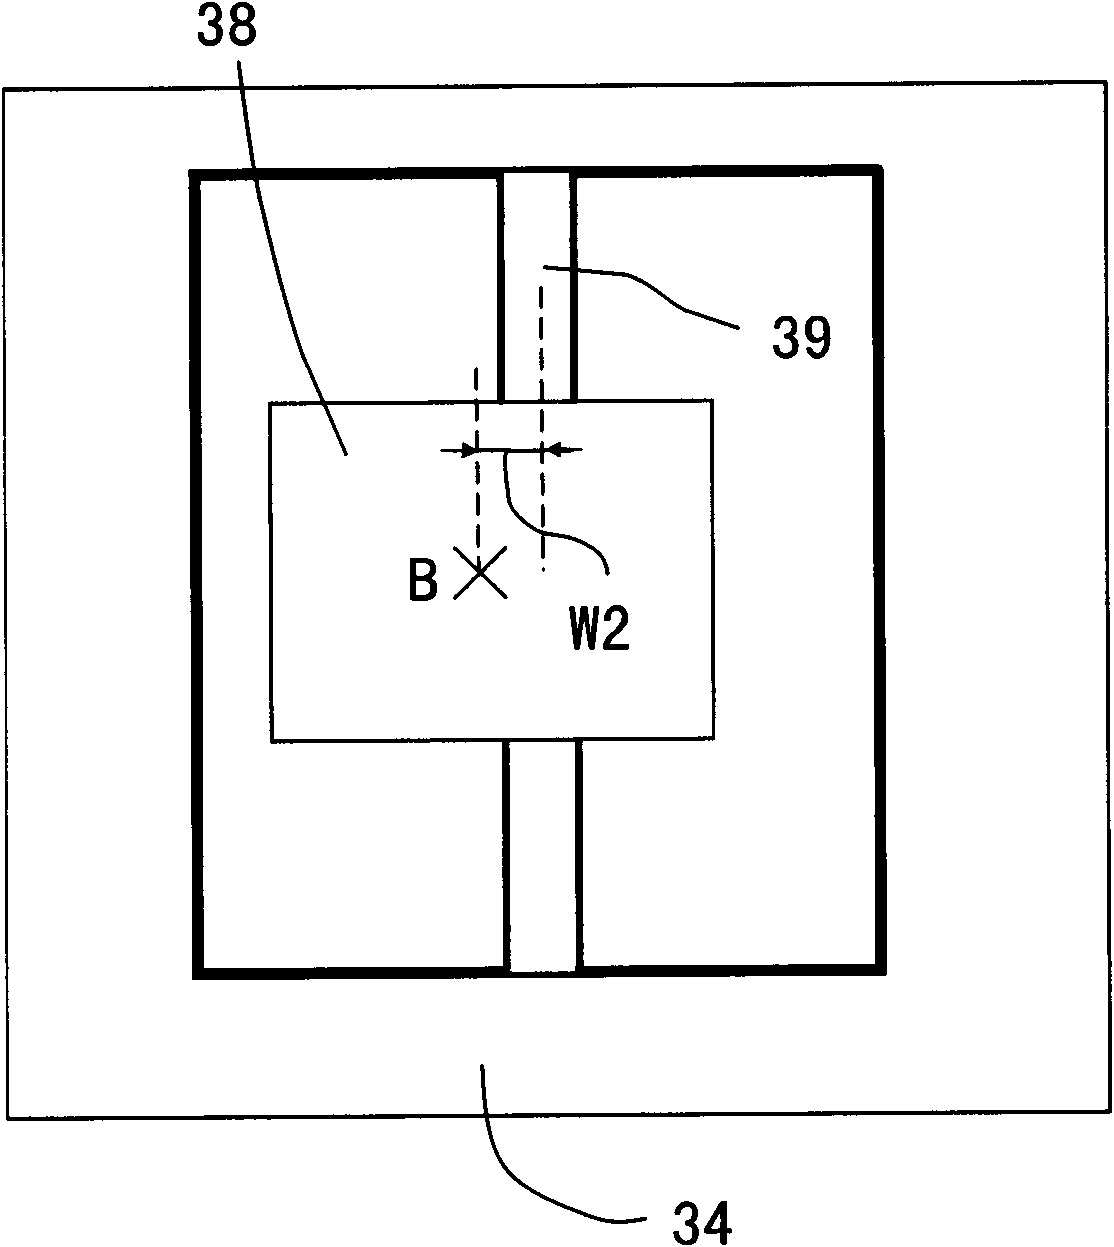 Two-dimensional scanning and reflecting device